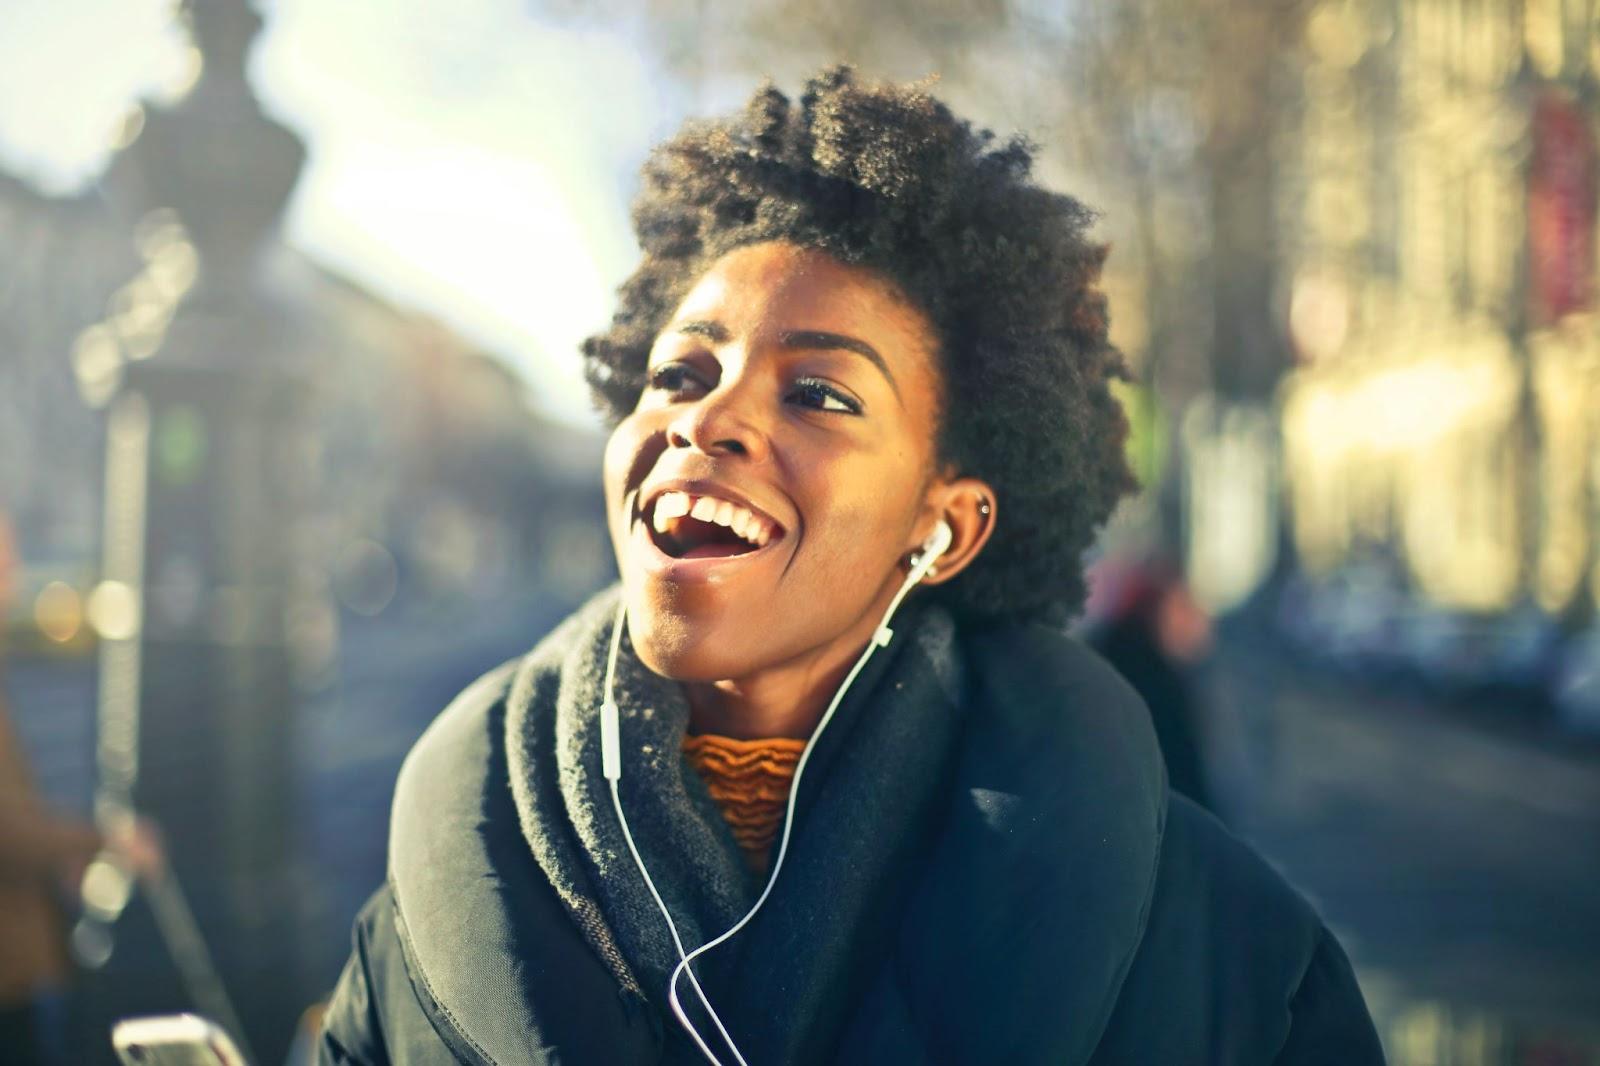  A person wearing wireless headphones with a built-in microphone, listening to music on their mobile phone. The headphones are sleek and stylish, with a Bluetooth logo visible on the side. The person is smiling and immersed in their music experience